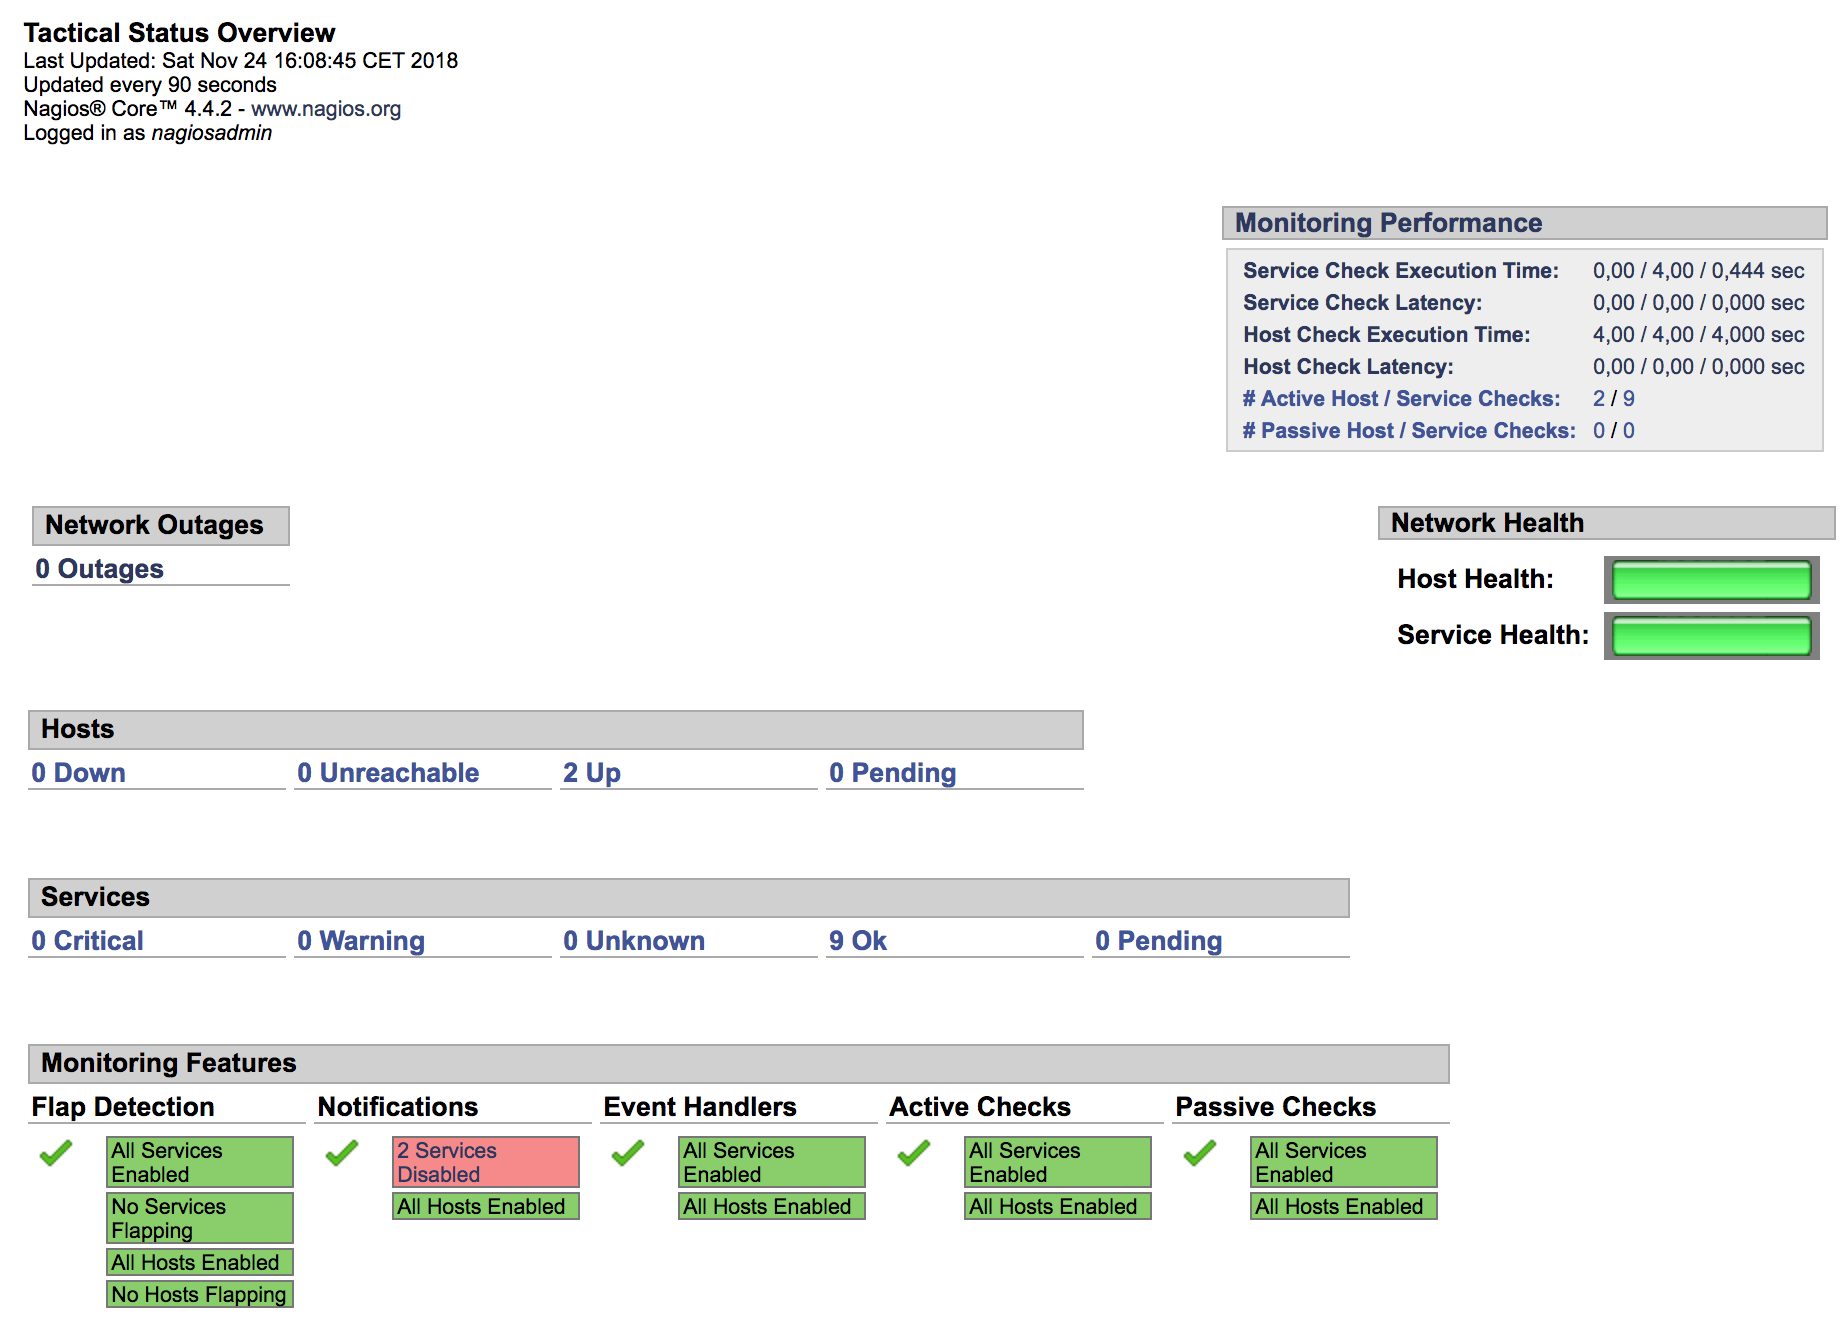 Page « Tactical Overview » de Nagios